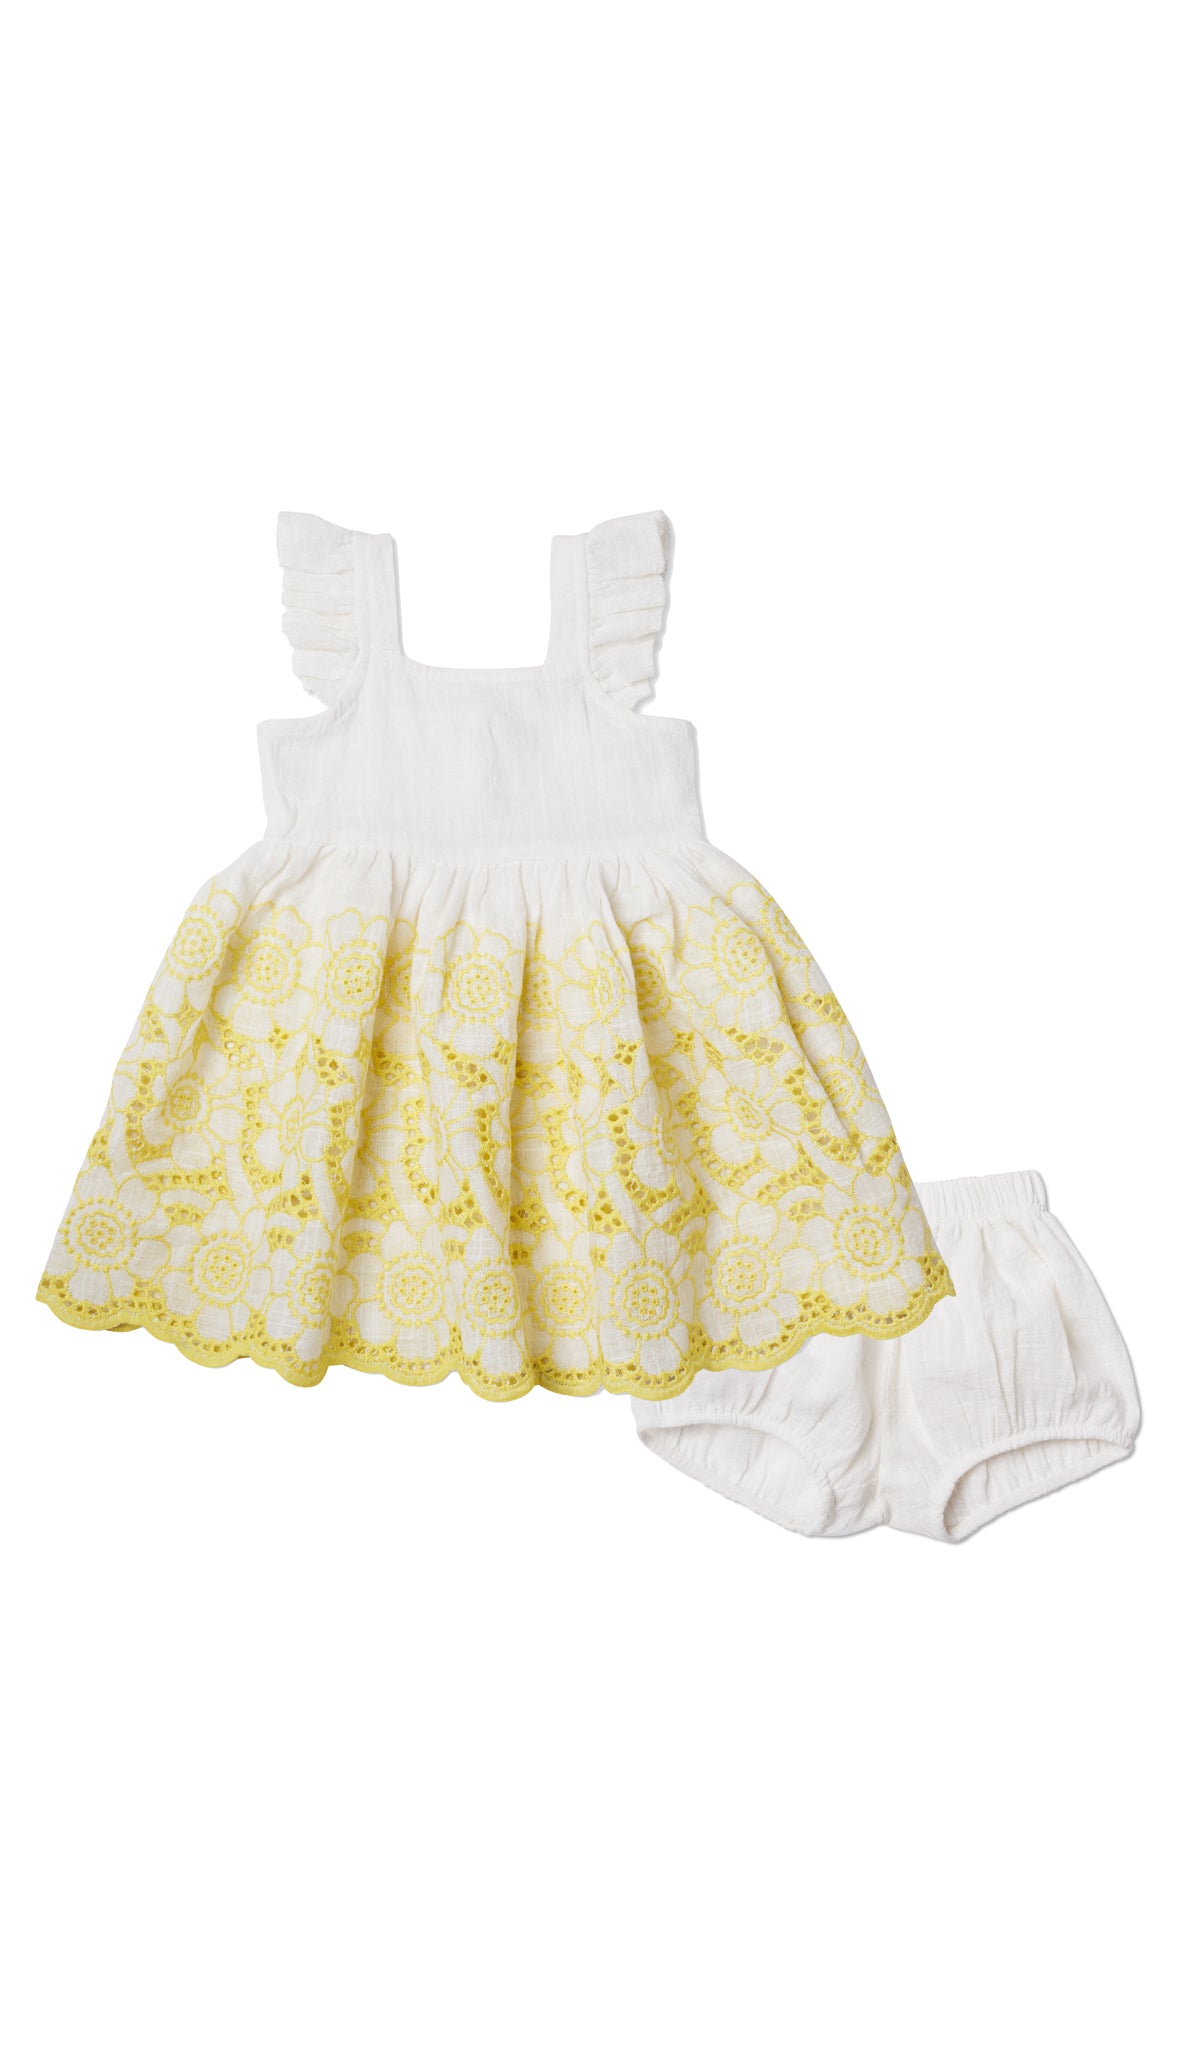 Ivory/Yellow Eyelet Baby Dress. Flat shot of eyelet dress laying over the matching diaper cover.